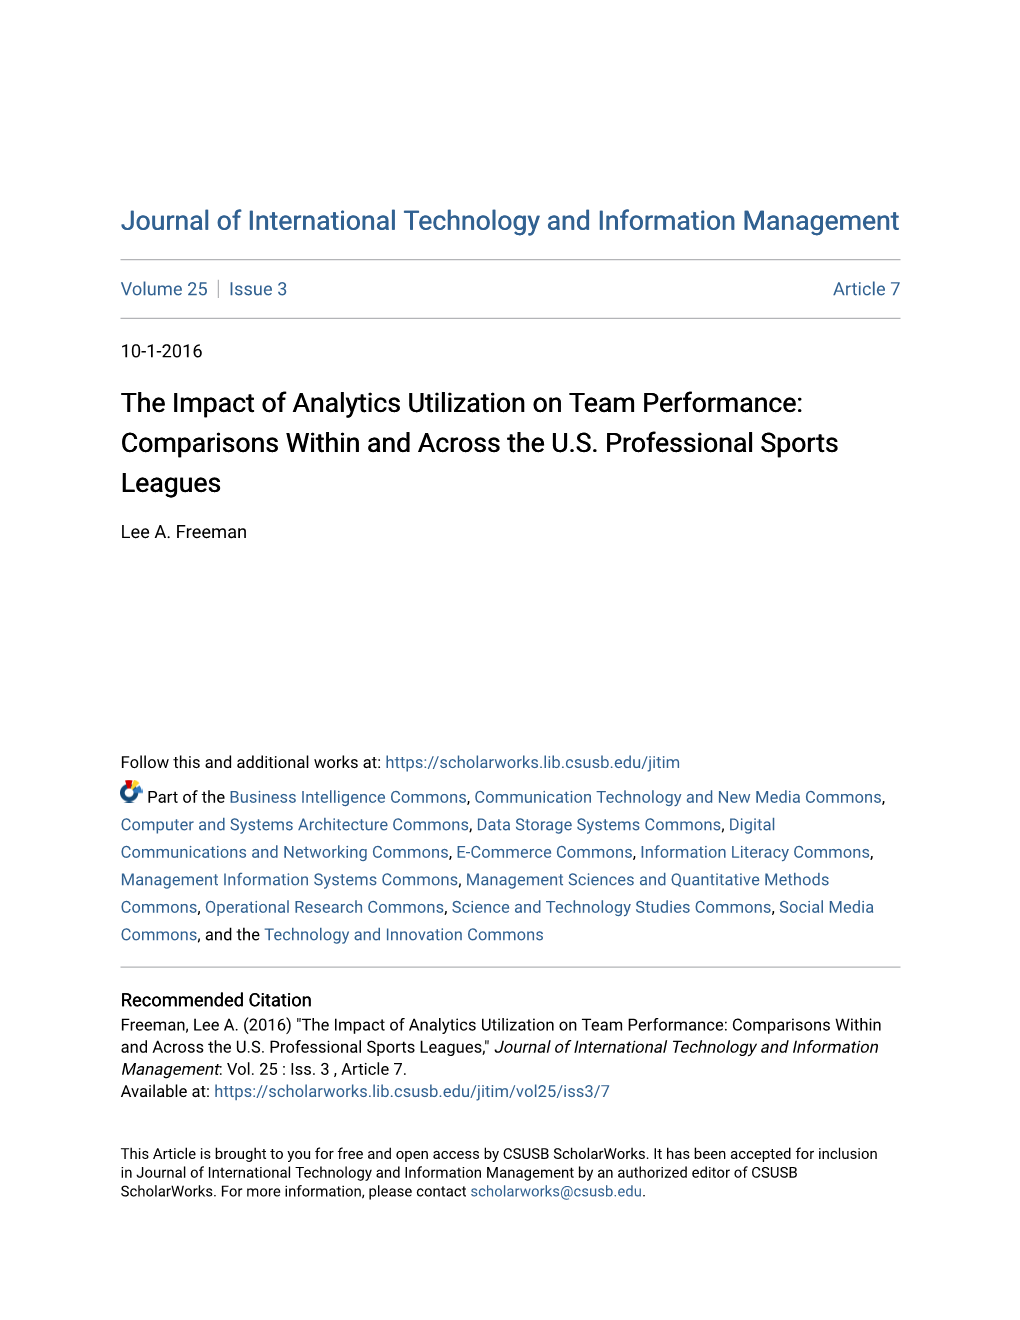 The Impact of Analytics Utilization on Team Performance: Comparisons Within and Across the U.S